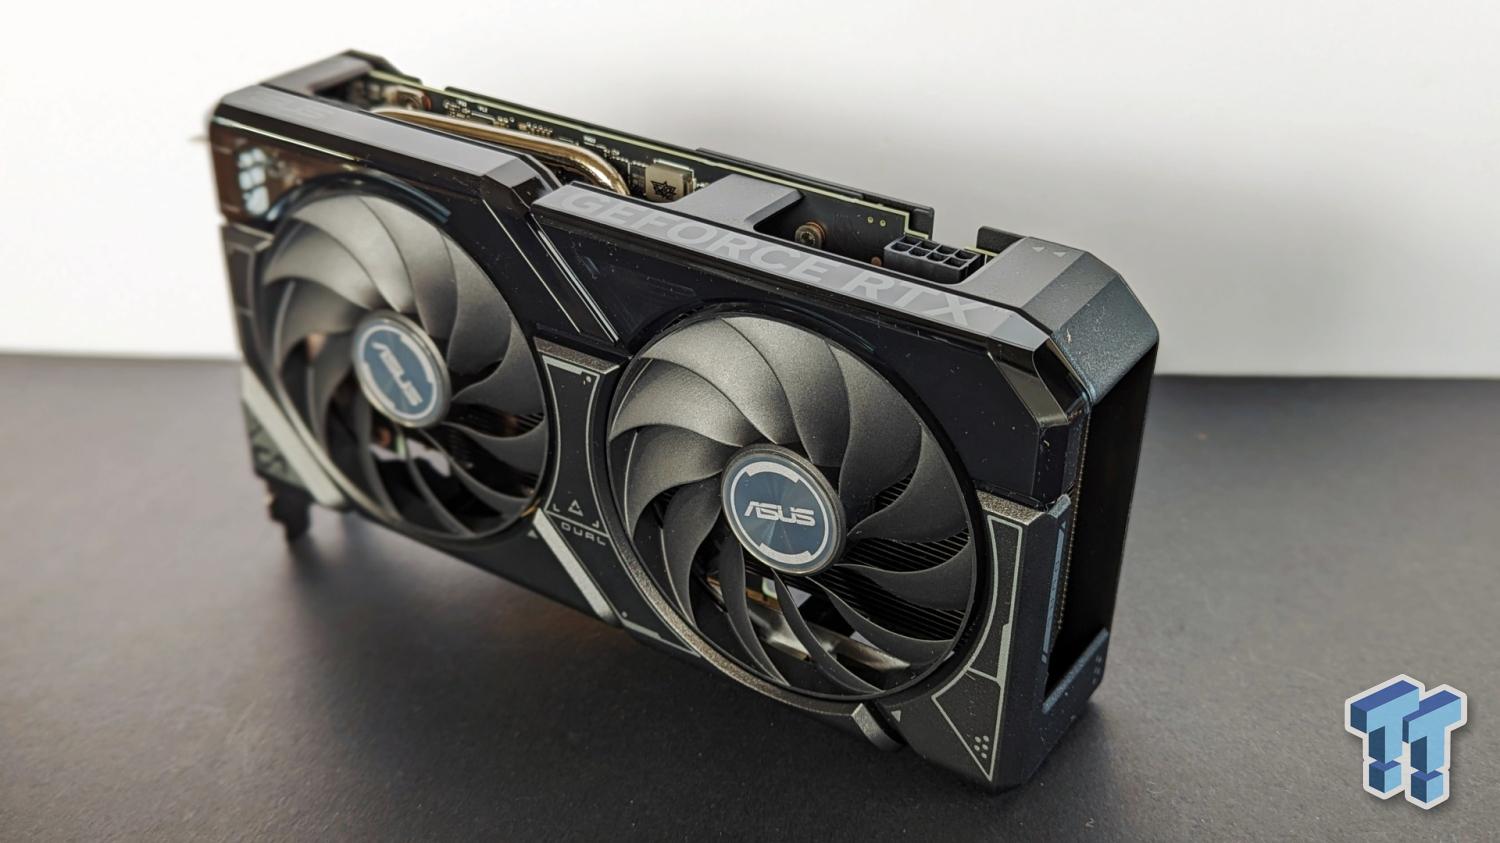 ASUS shows off RTX 4060 Ti graphics card with M.2 SSD slot 